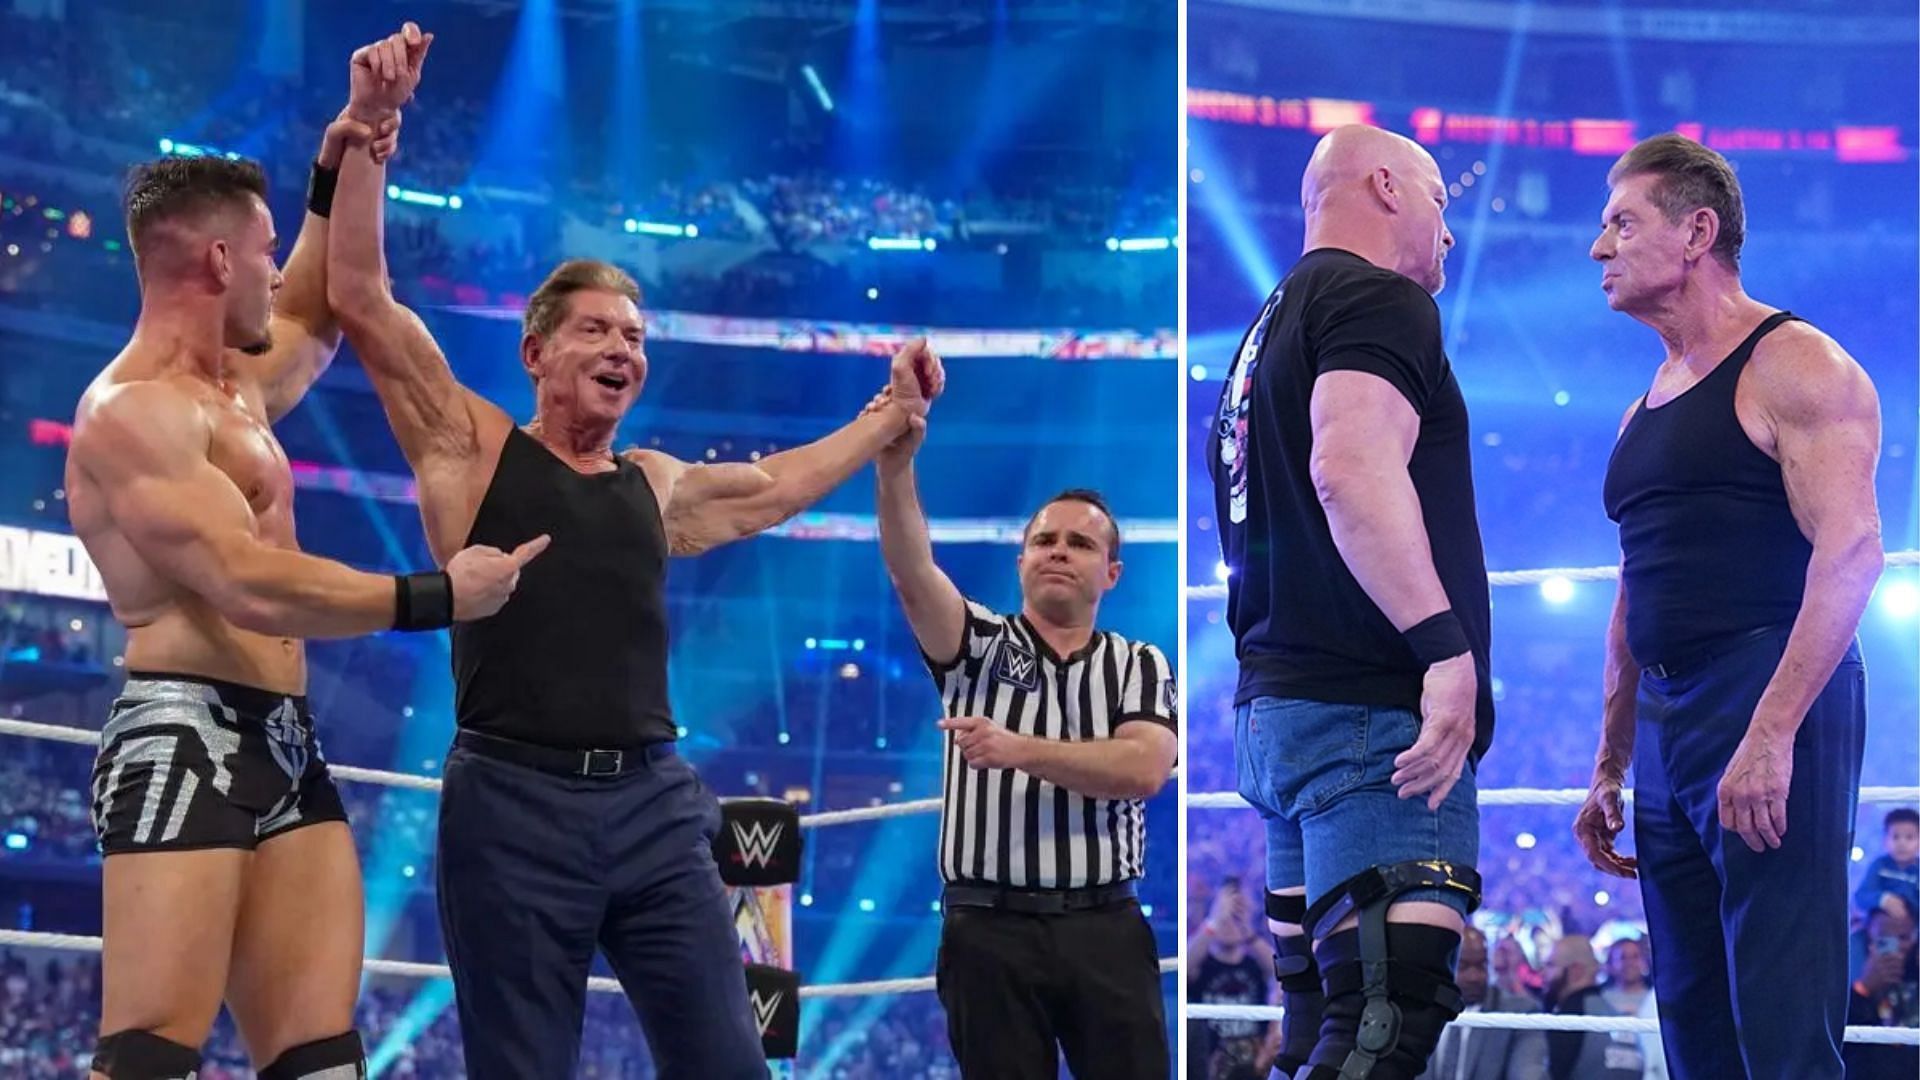 Vince McMahon defeated Pat McAfee and later confronted his arch-rival Steve Austin at WrestleMania